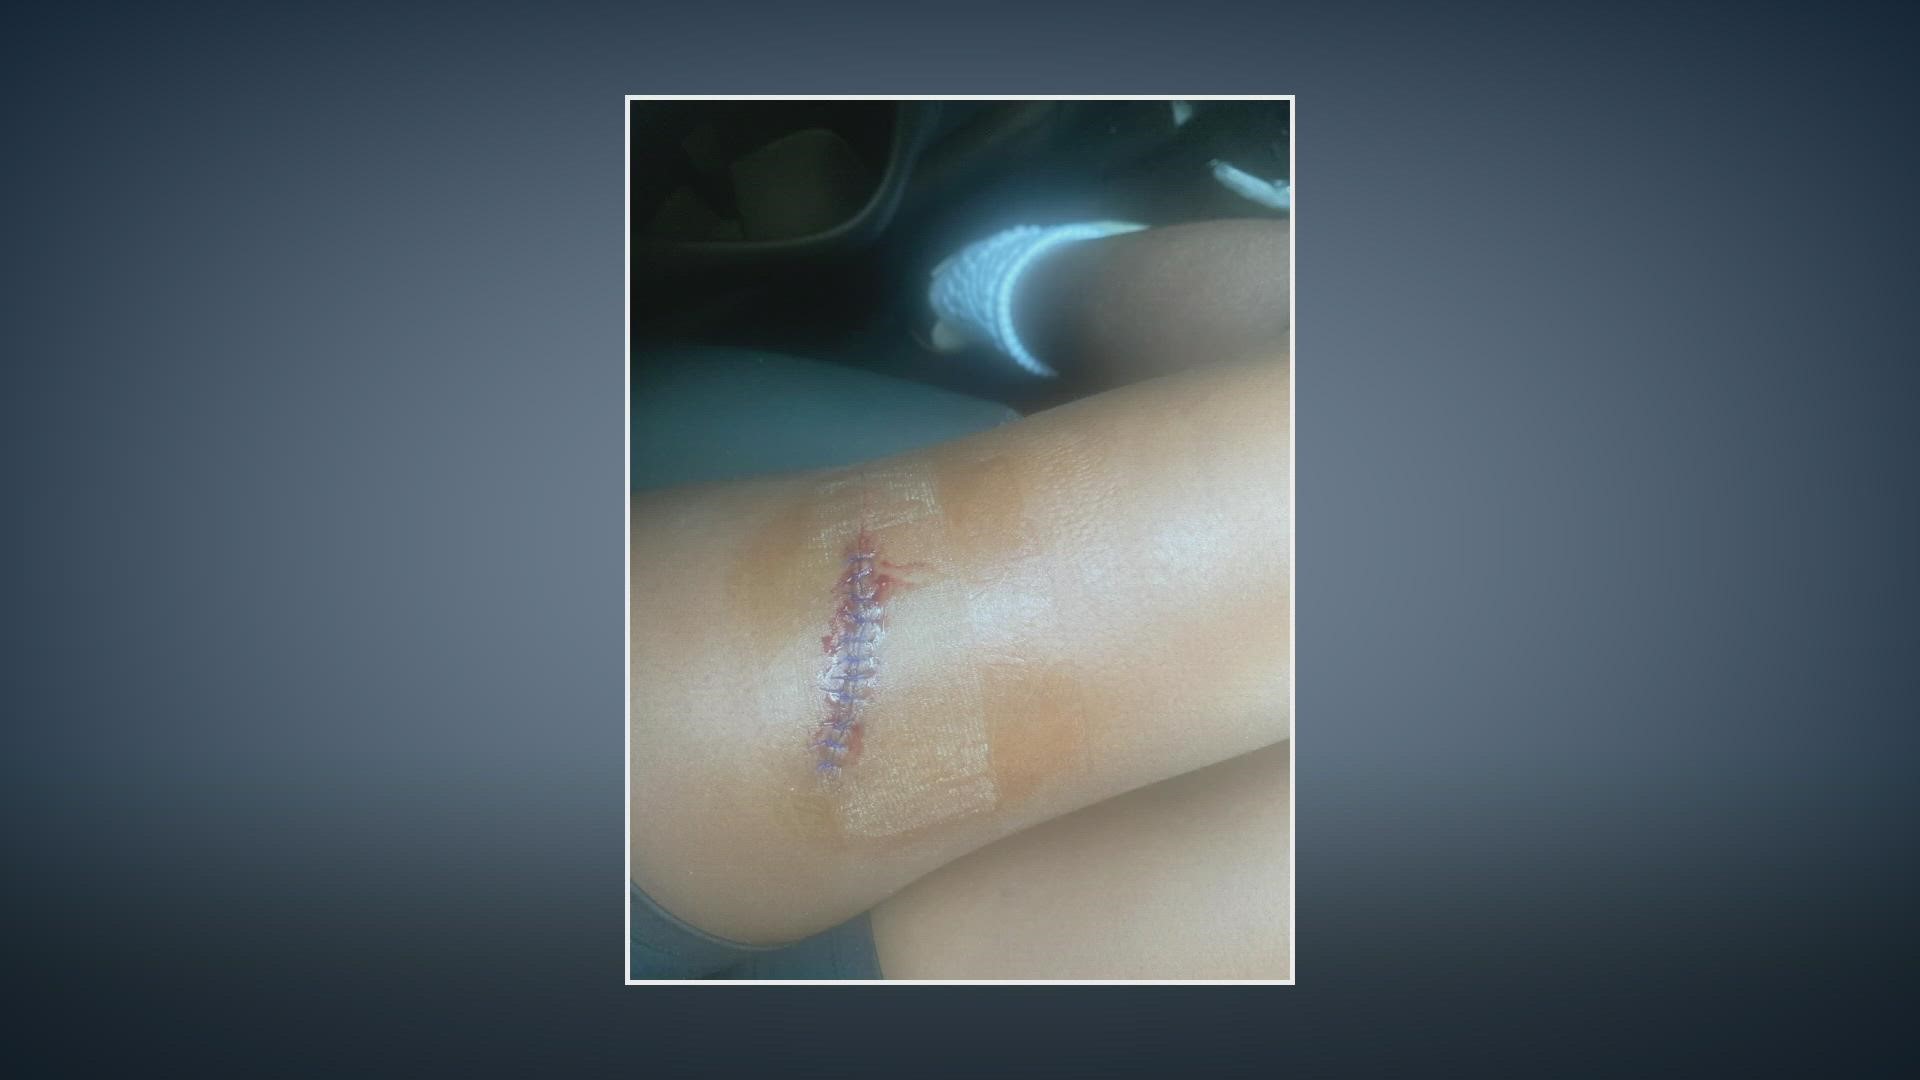 The wounded 16-year-old student was rushed to the emergency room, where she required more than 20 stitches to sew up a wound to her left thigh.